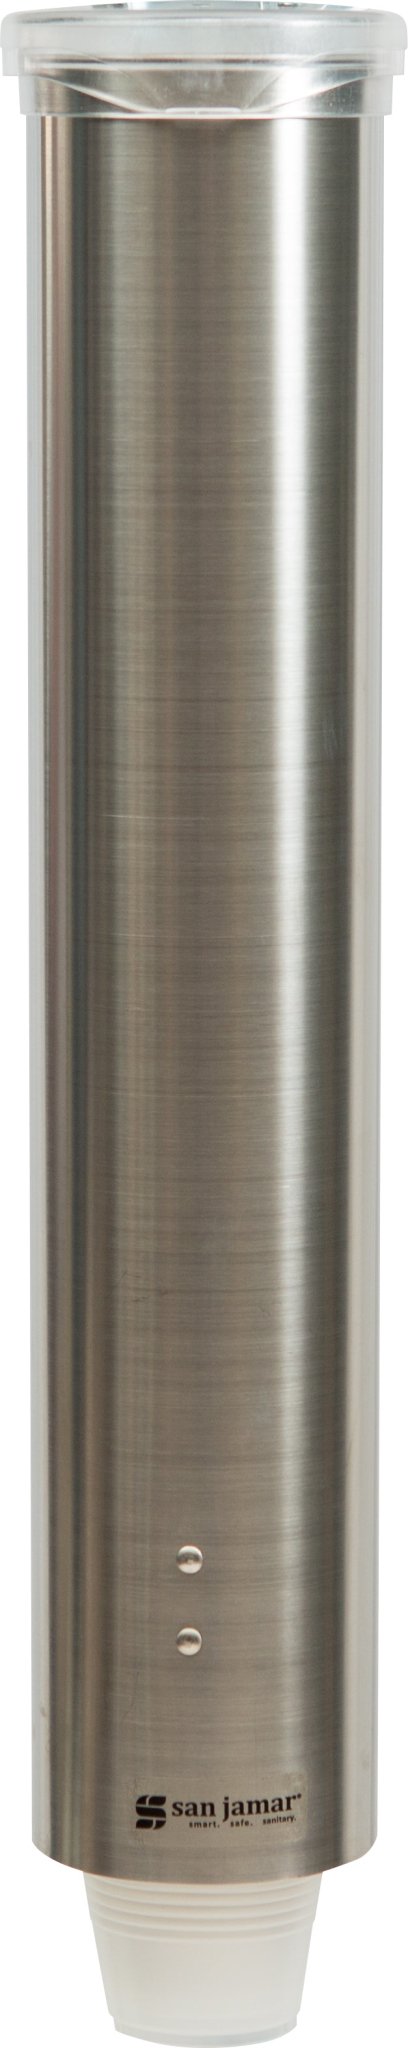 San Jamar C4150SS Small Pull-Type Stainless Steel Water Cup Dispenser